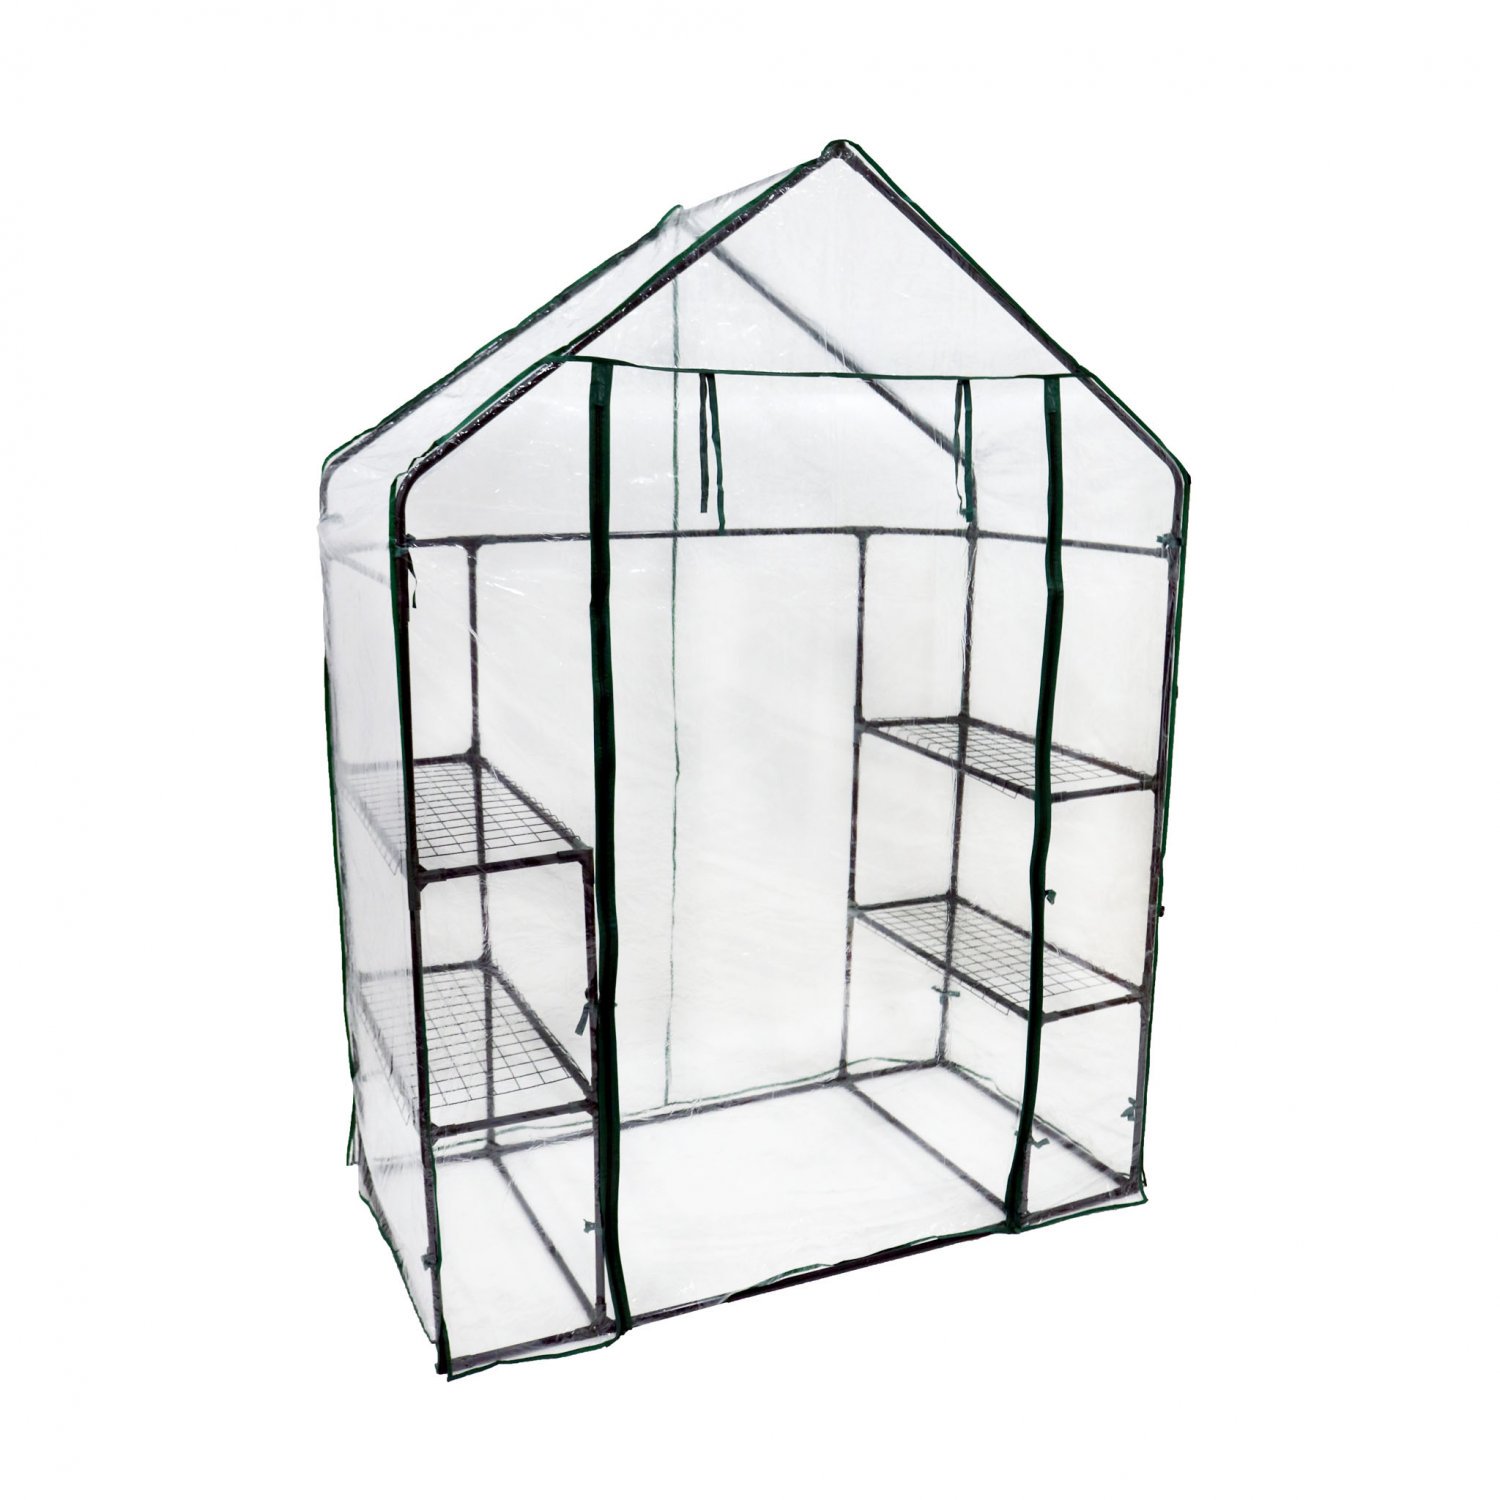 Replacement Spare PVC Cover for 3-Tier Walk-in Garden Greenhouse